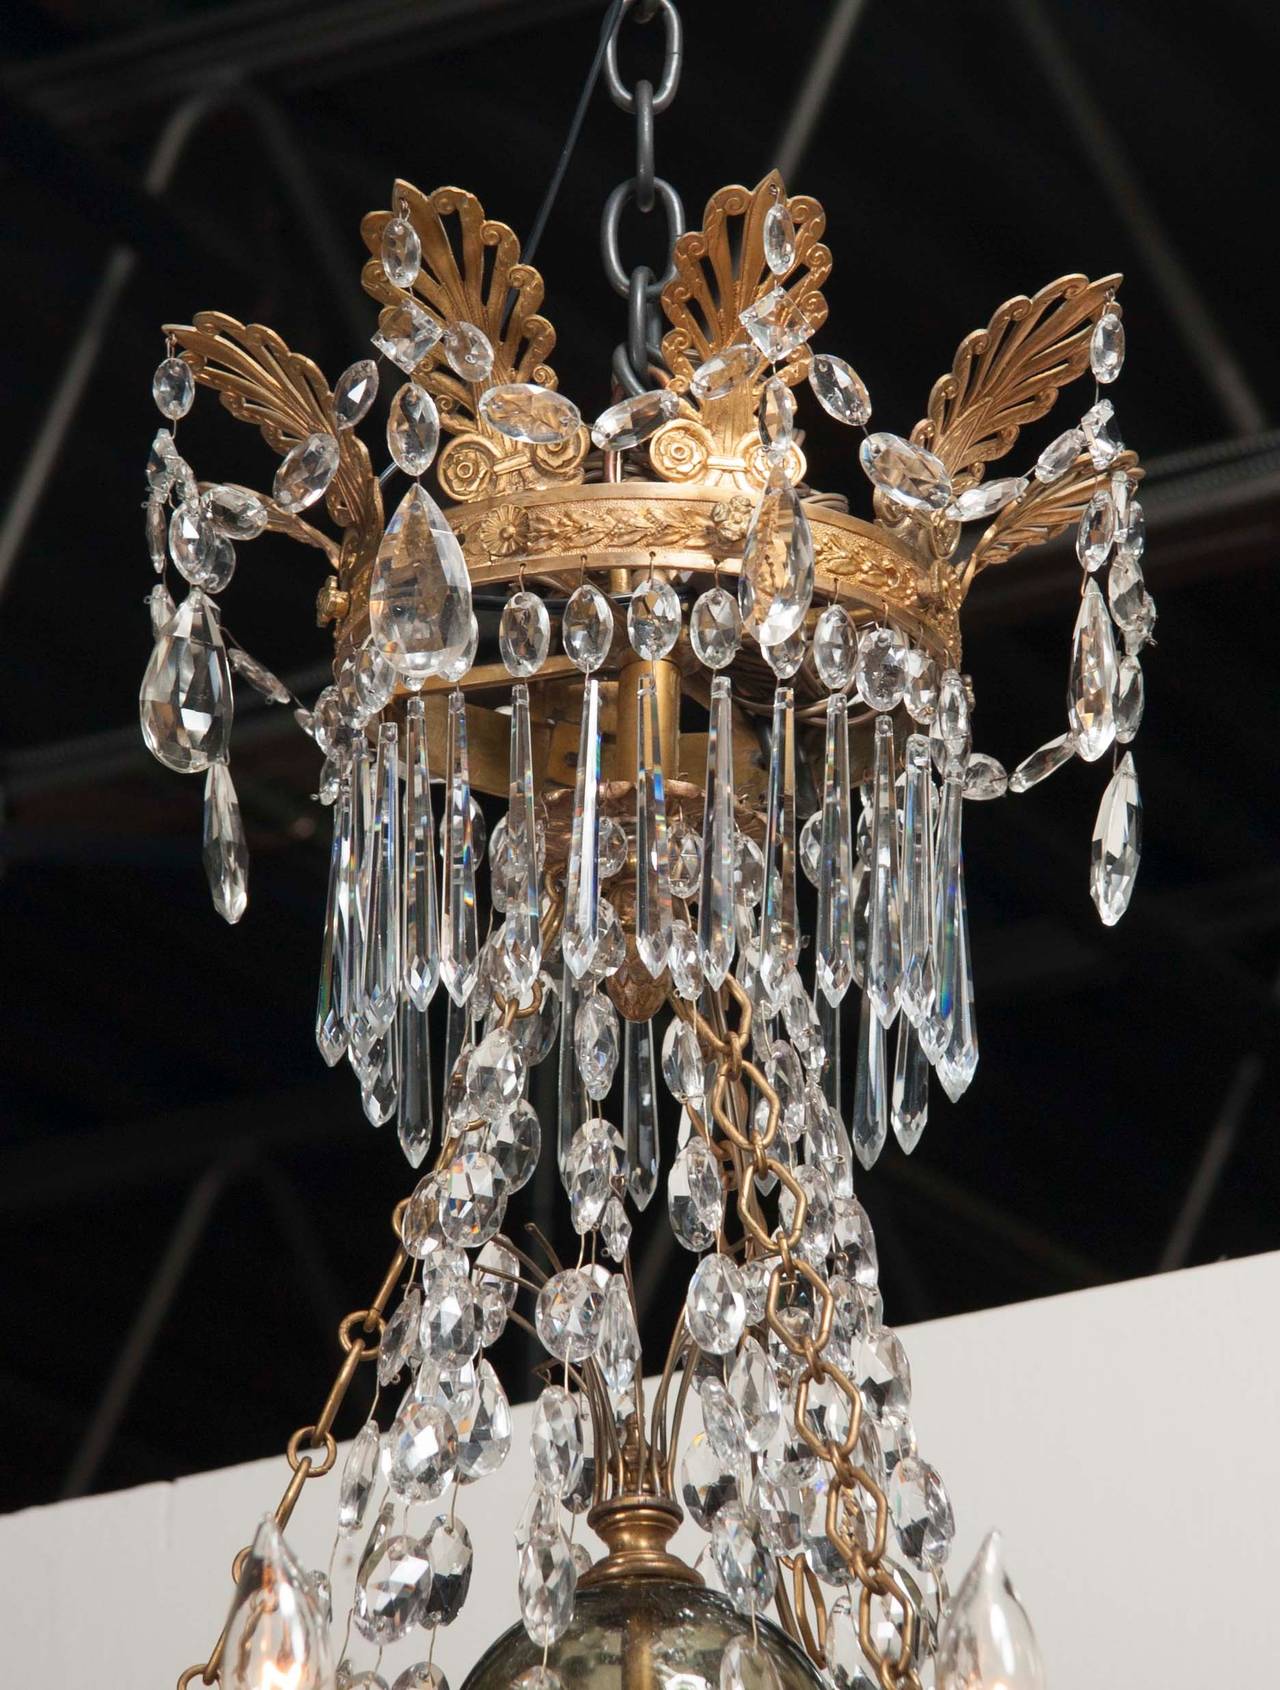 A twelve-light, fine quality, doré bronze, Russian neoclassical Empire chandelier with crystal drops.